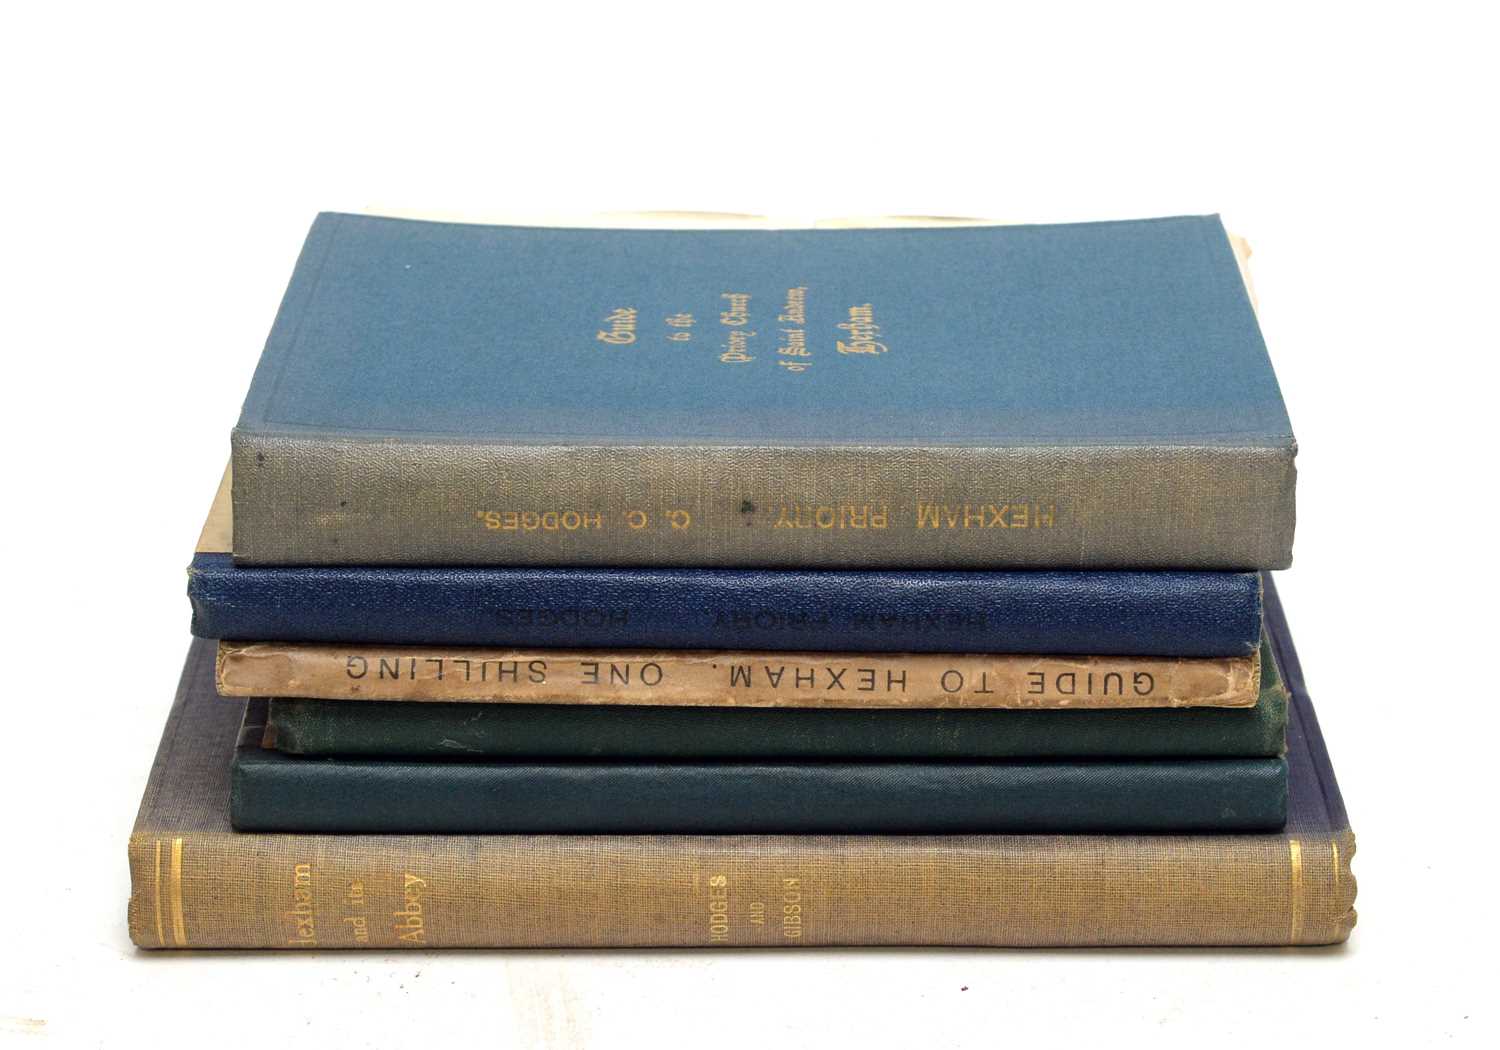 Lot 744 - Hexham interest books and guides